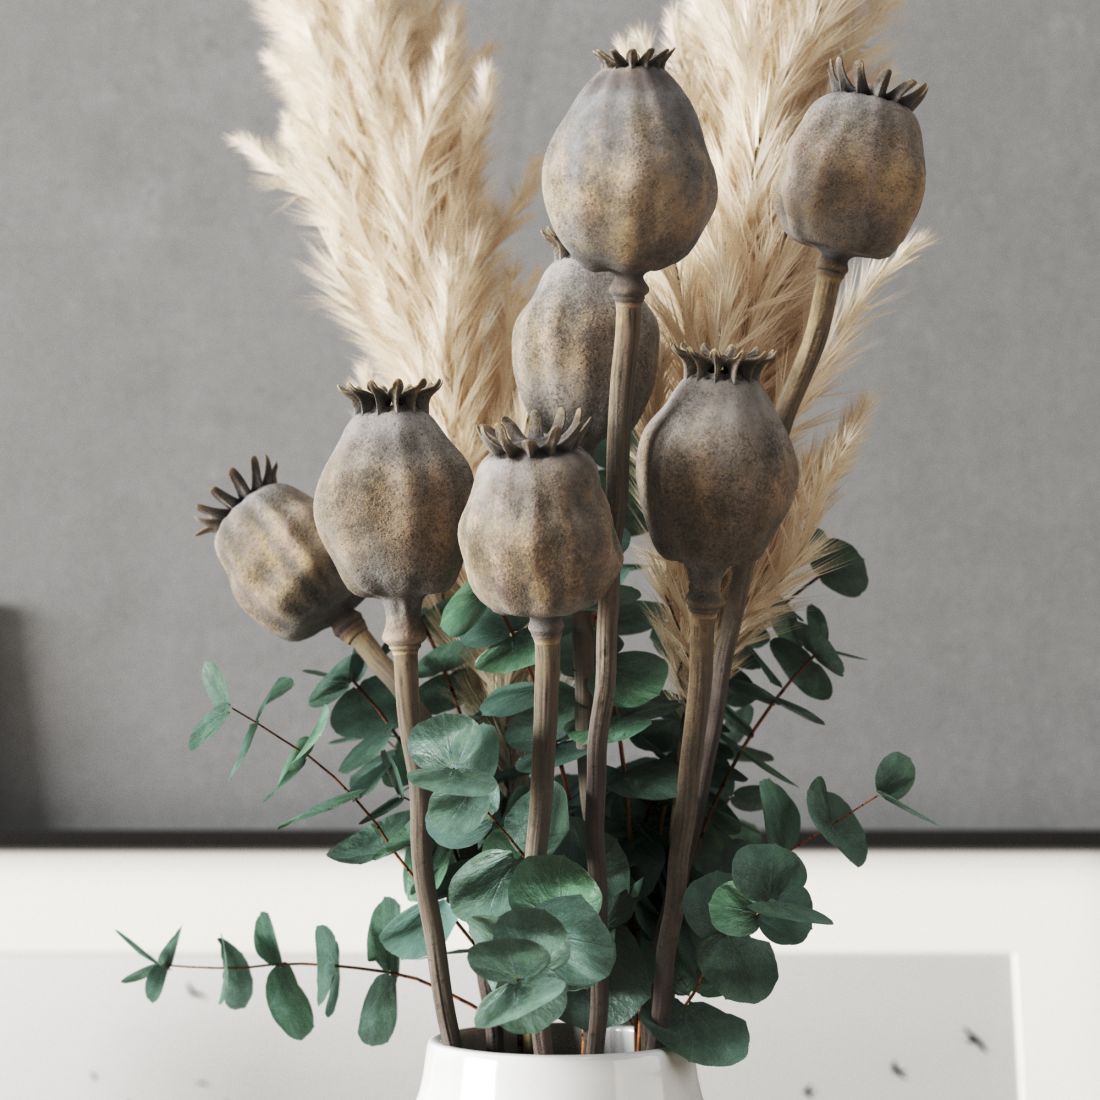 MyPoppies - Poppy Capsules, Poppy Pods | Small & Without Handle | Dried |  Craft Accessories & Decoration (200 g) : Amazon.de: Home & Kitchen